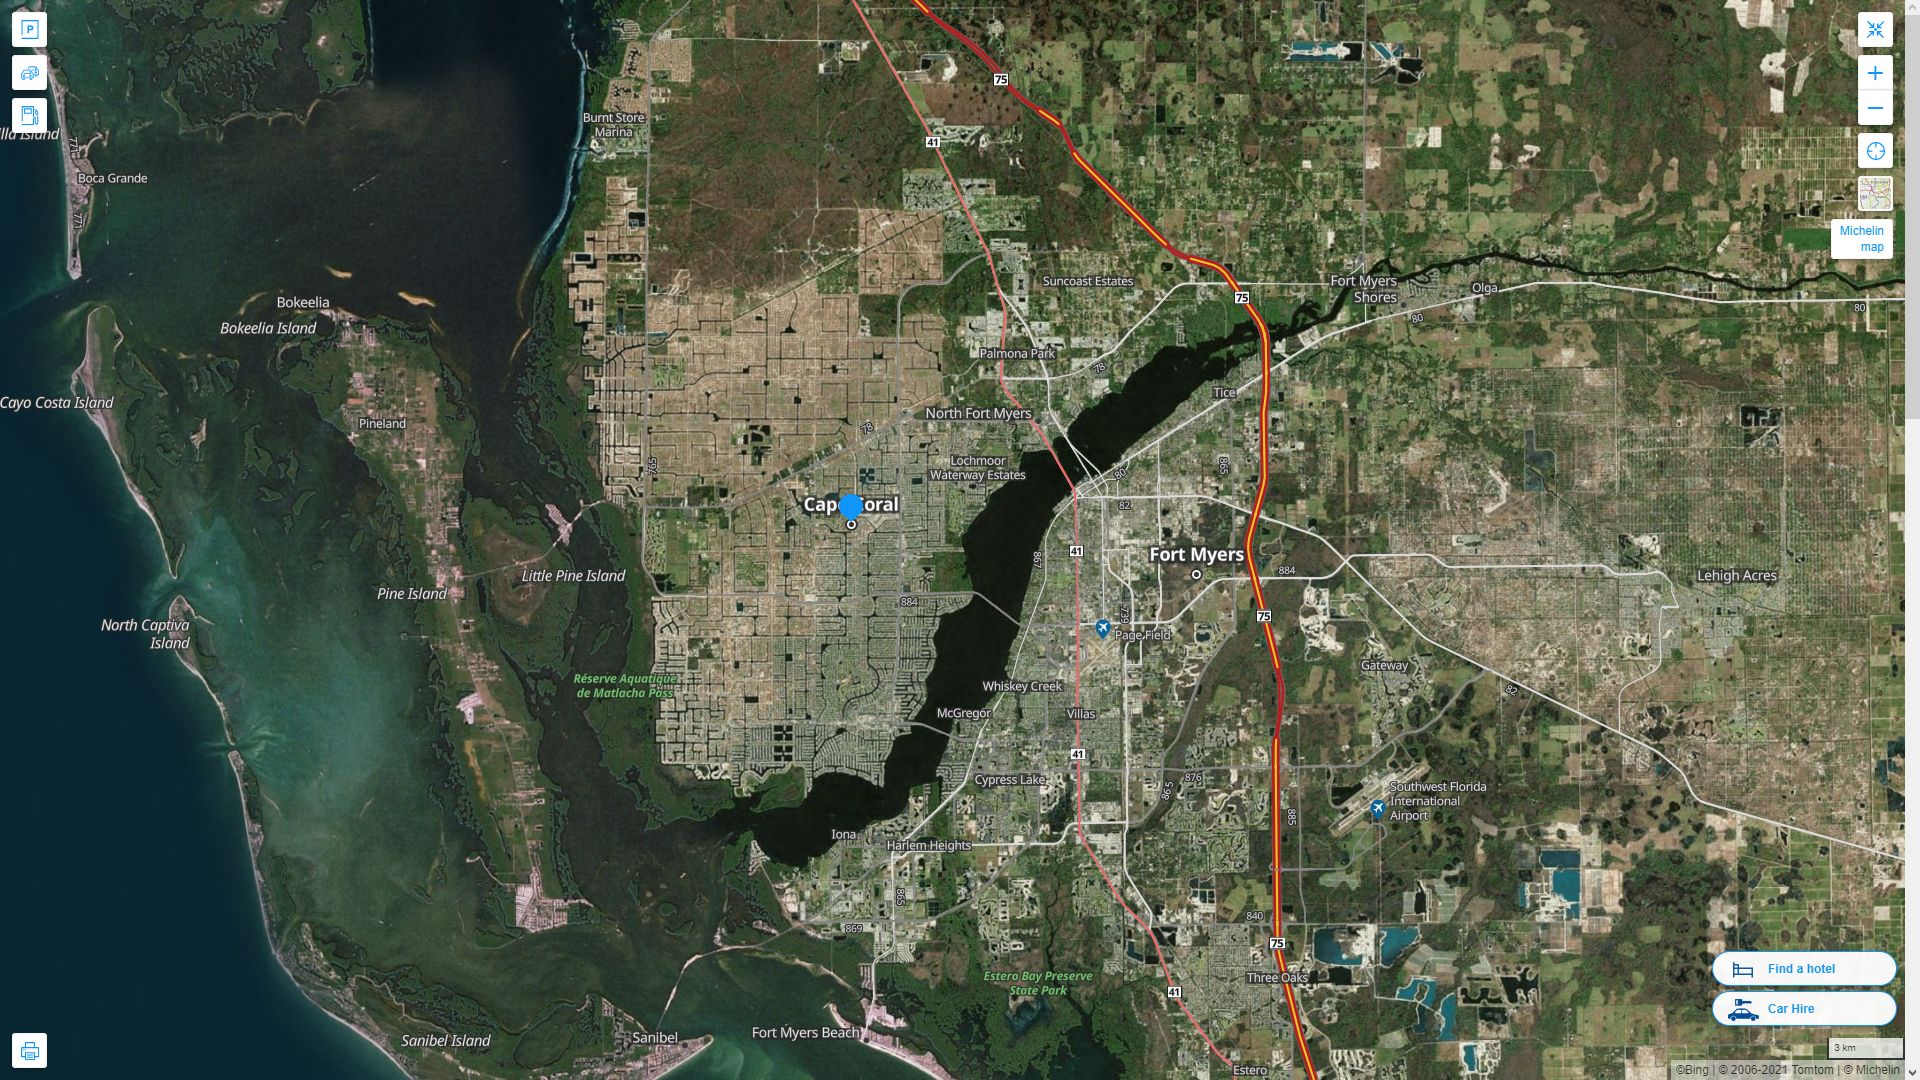 Cape Coral Florida Highway and Road Map with Satellite View